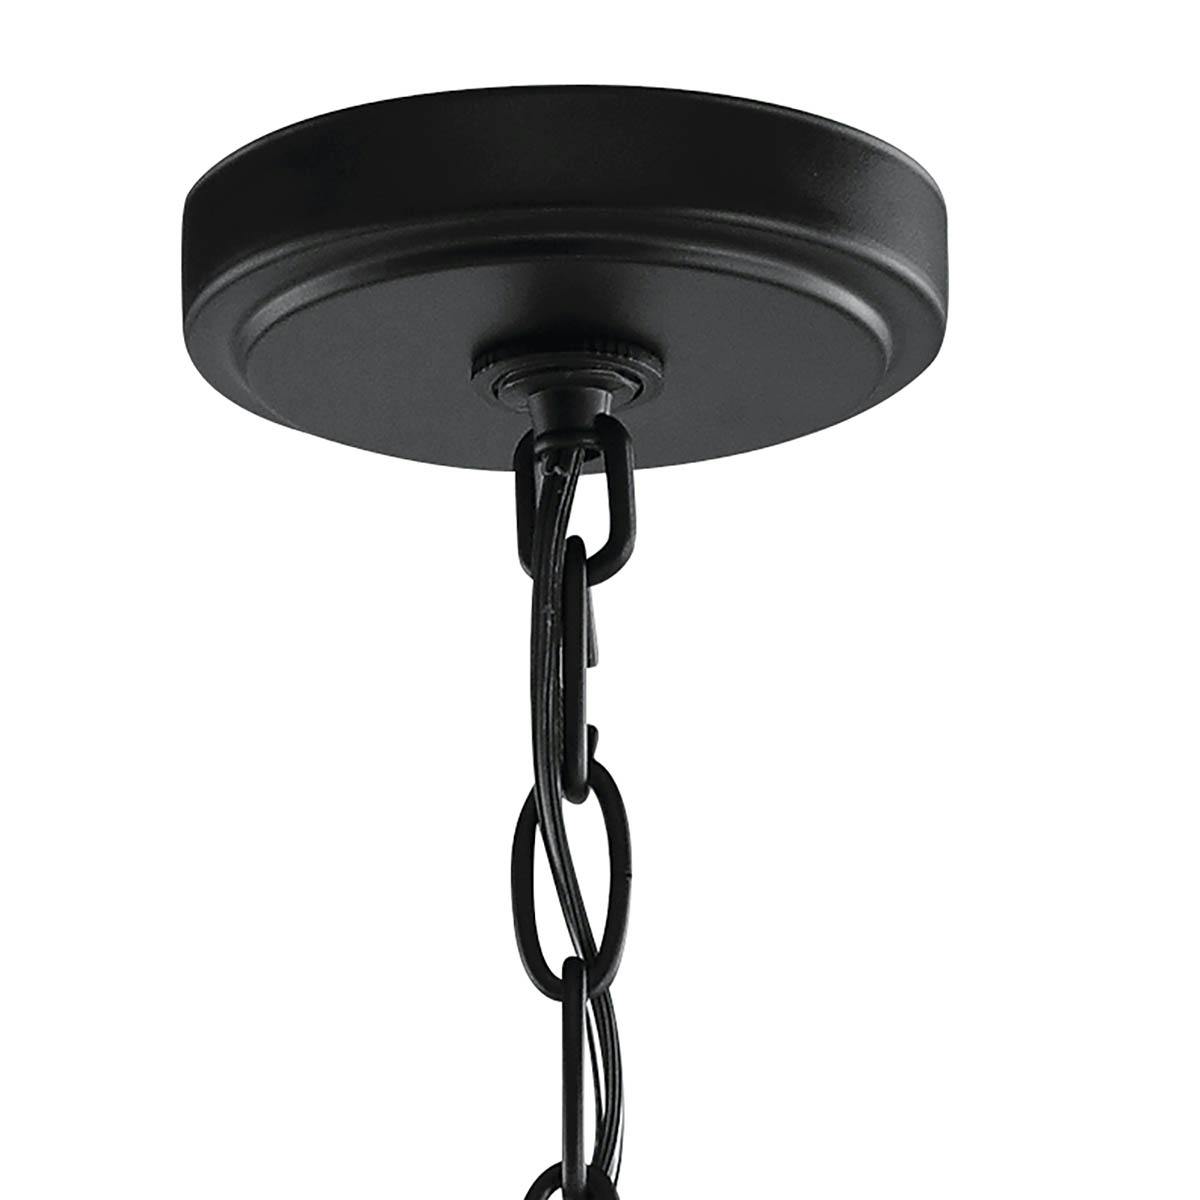 Canopy for the Voleta 20.75" 3 Light Pendant Black on a white background